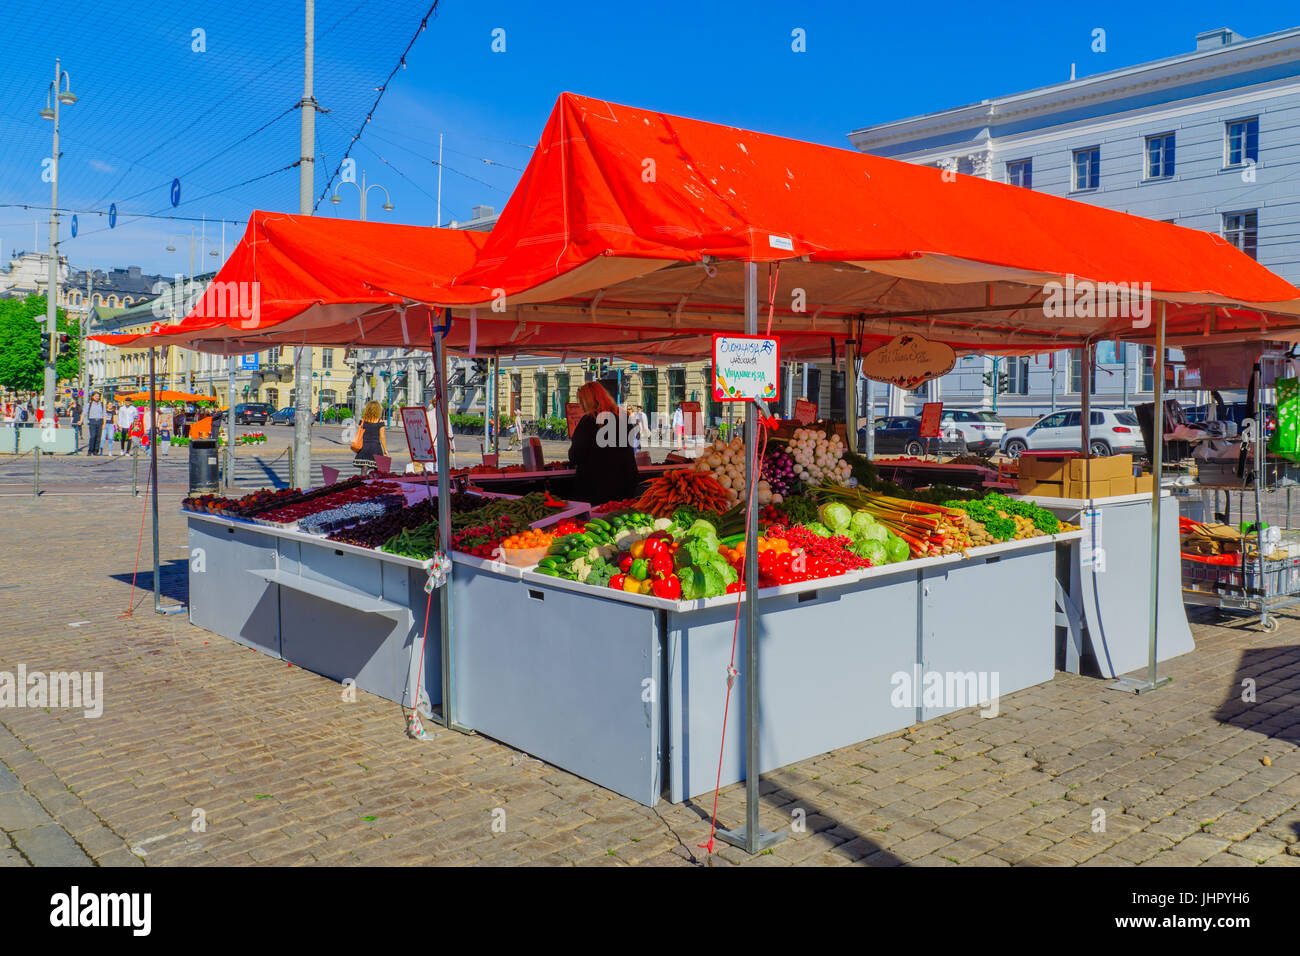 HELSINKI, FINLAND - JUNE 16, 2017: Scene of the South Harbor Market Square, with locals and visitors, in Helsinki, Finland Stock Photo